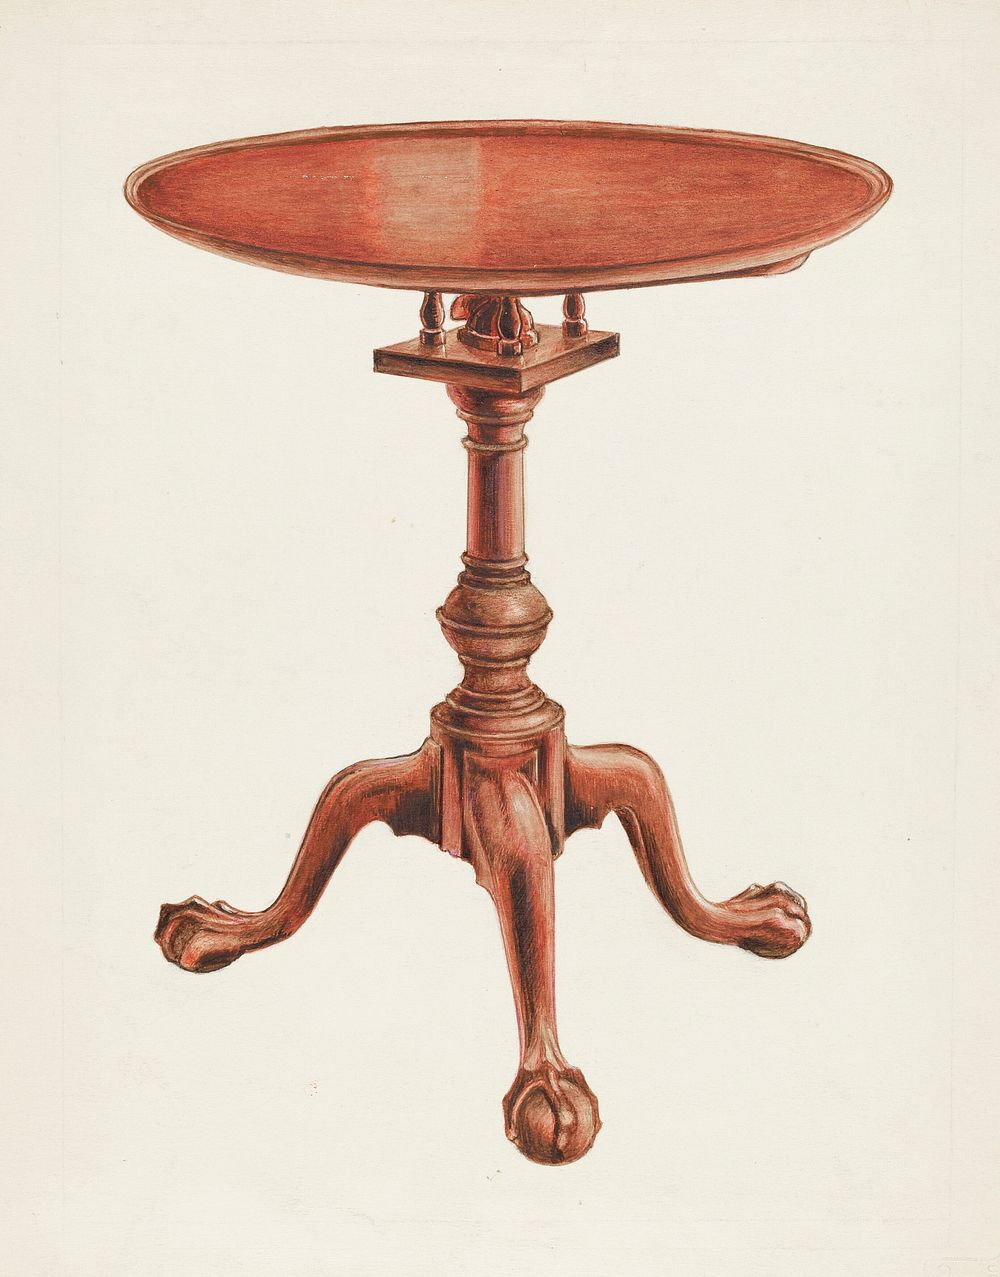 Tripod-table (ca.1936) by Arthur Johnson. Original from The National Gallery of Art. Digitally enhanced by rawpixel.